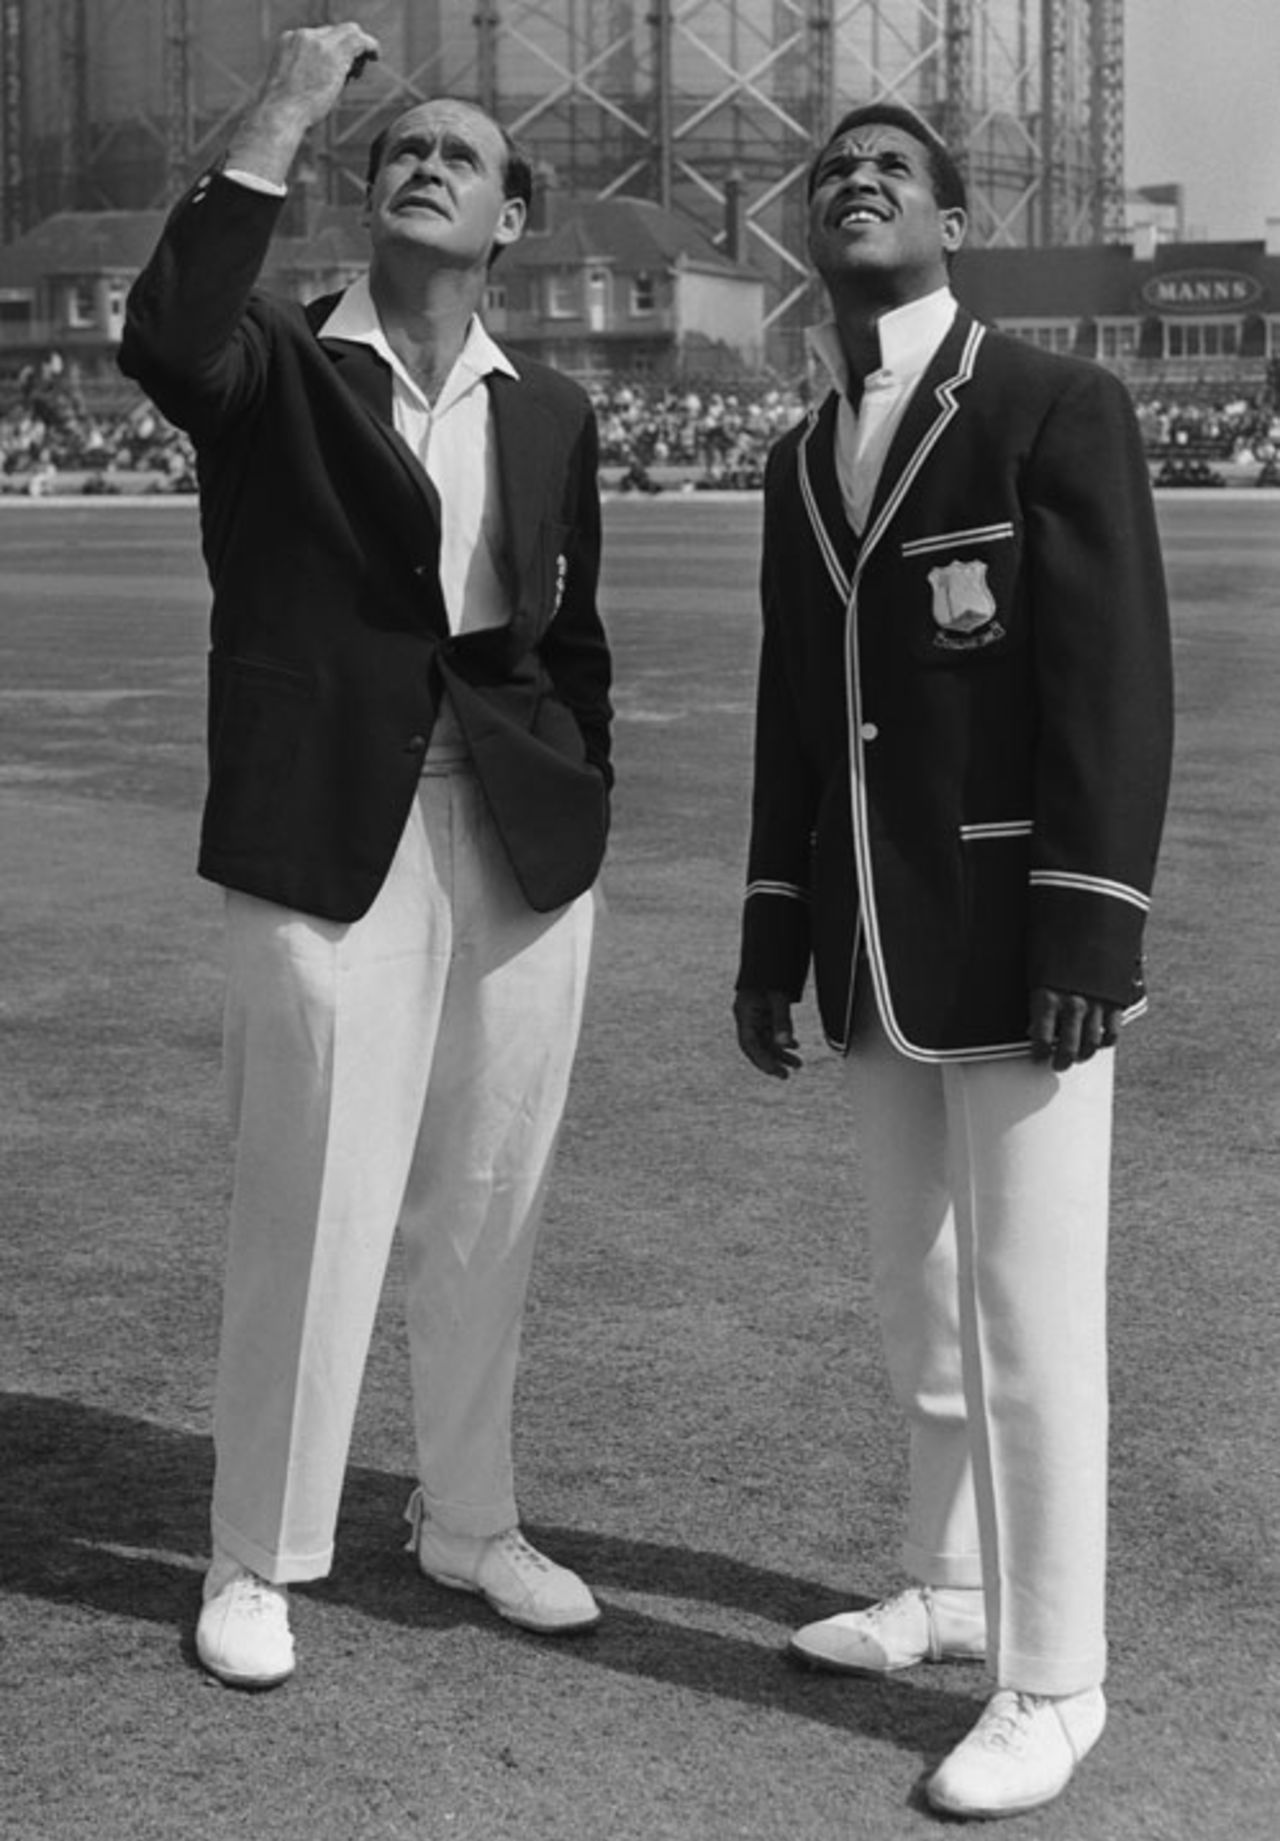 Brian Close tosses the coin while Garry Sobers waits to call , 5th Test, The Oval, 1st day, August 18, 1966